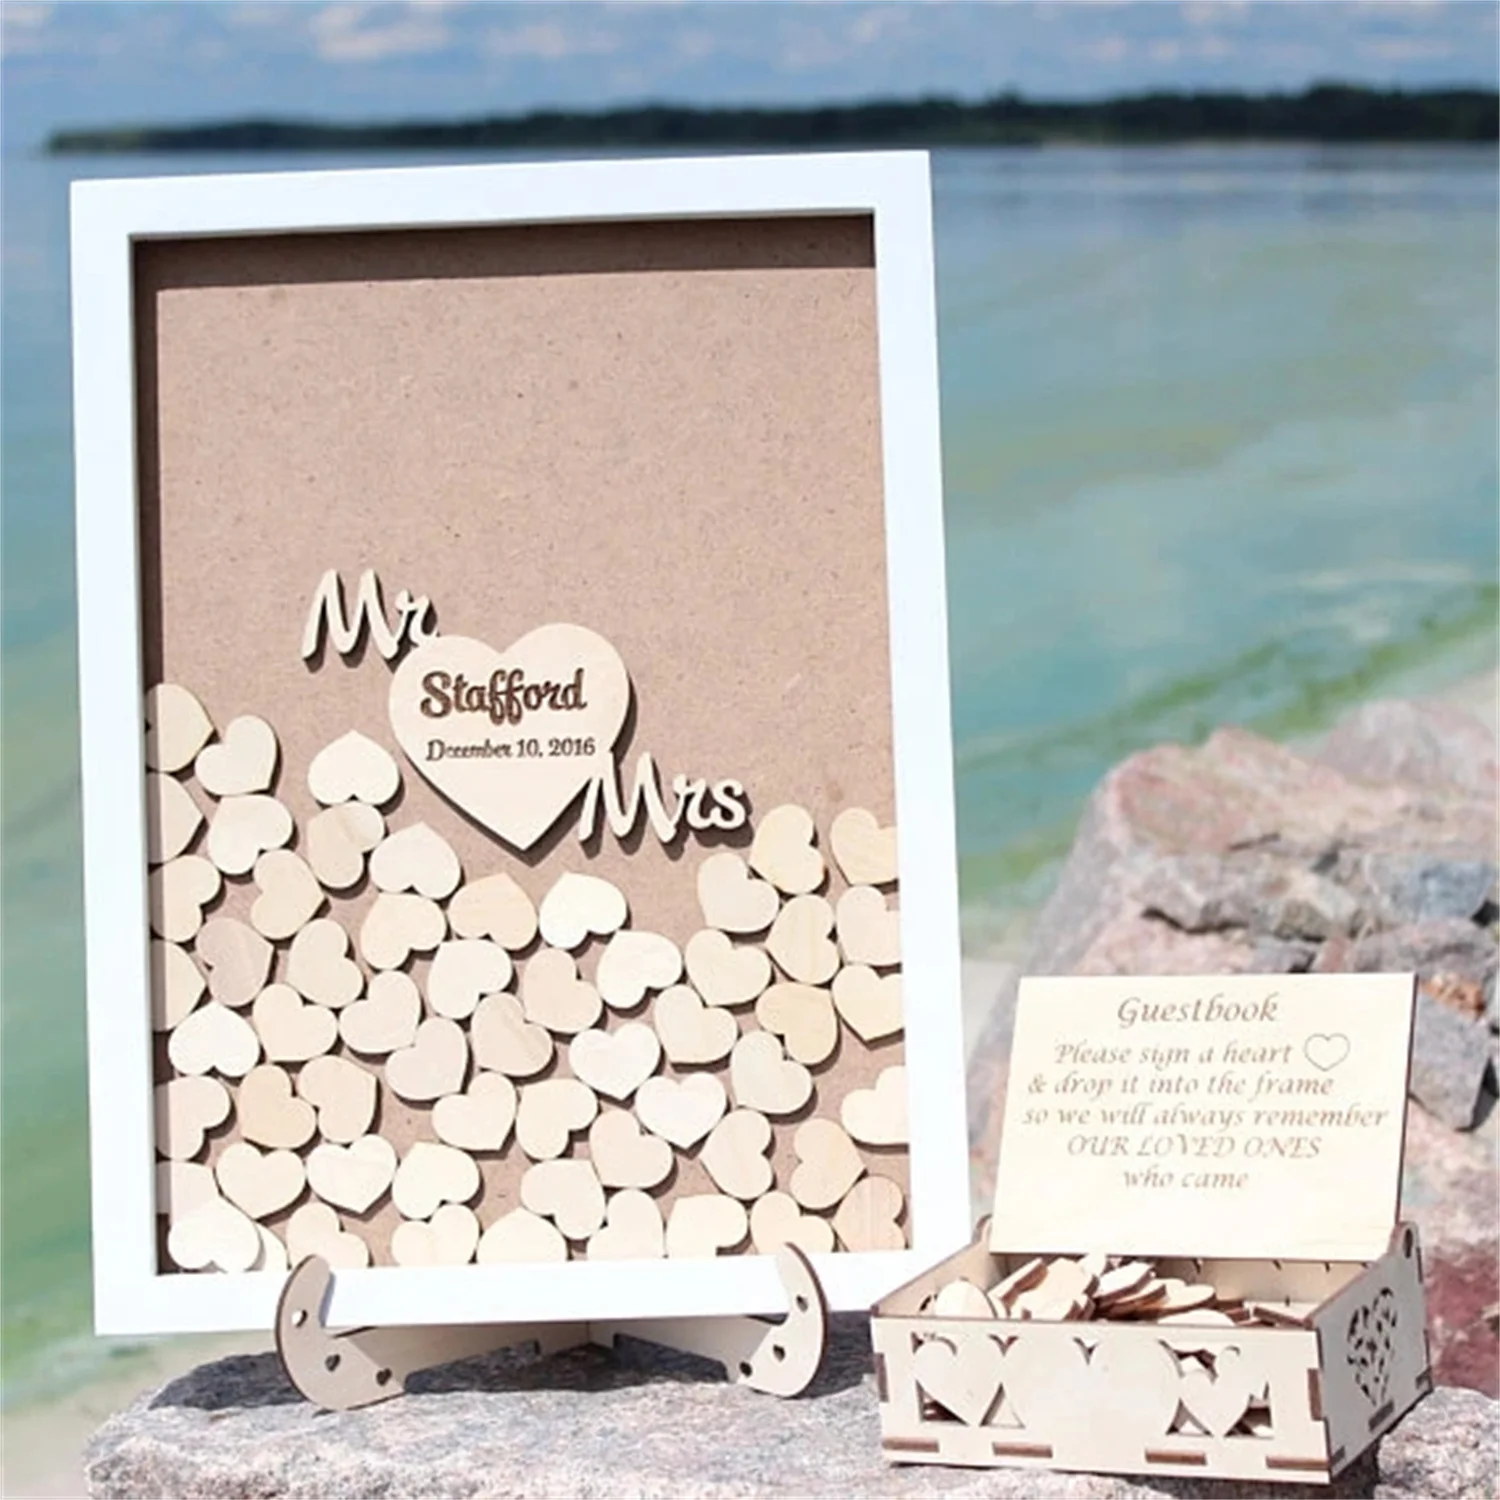 

Personalized Mr & Mrs Rustic Wedding Engraved Alternative Wooden Memory Guestbooks With Heart Drop Box Signature Guest Books